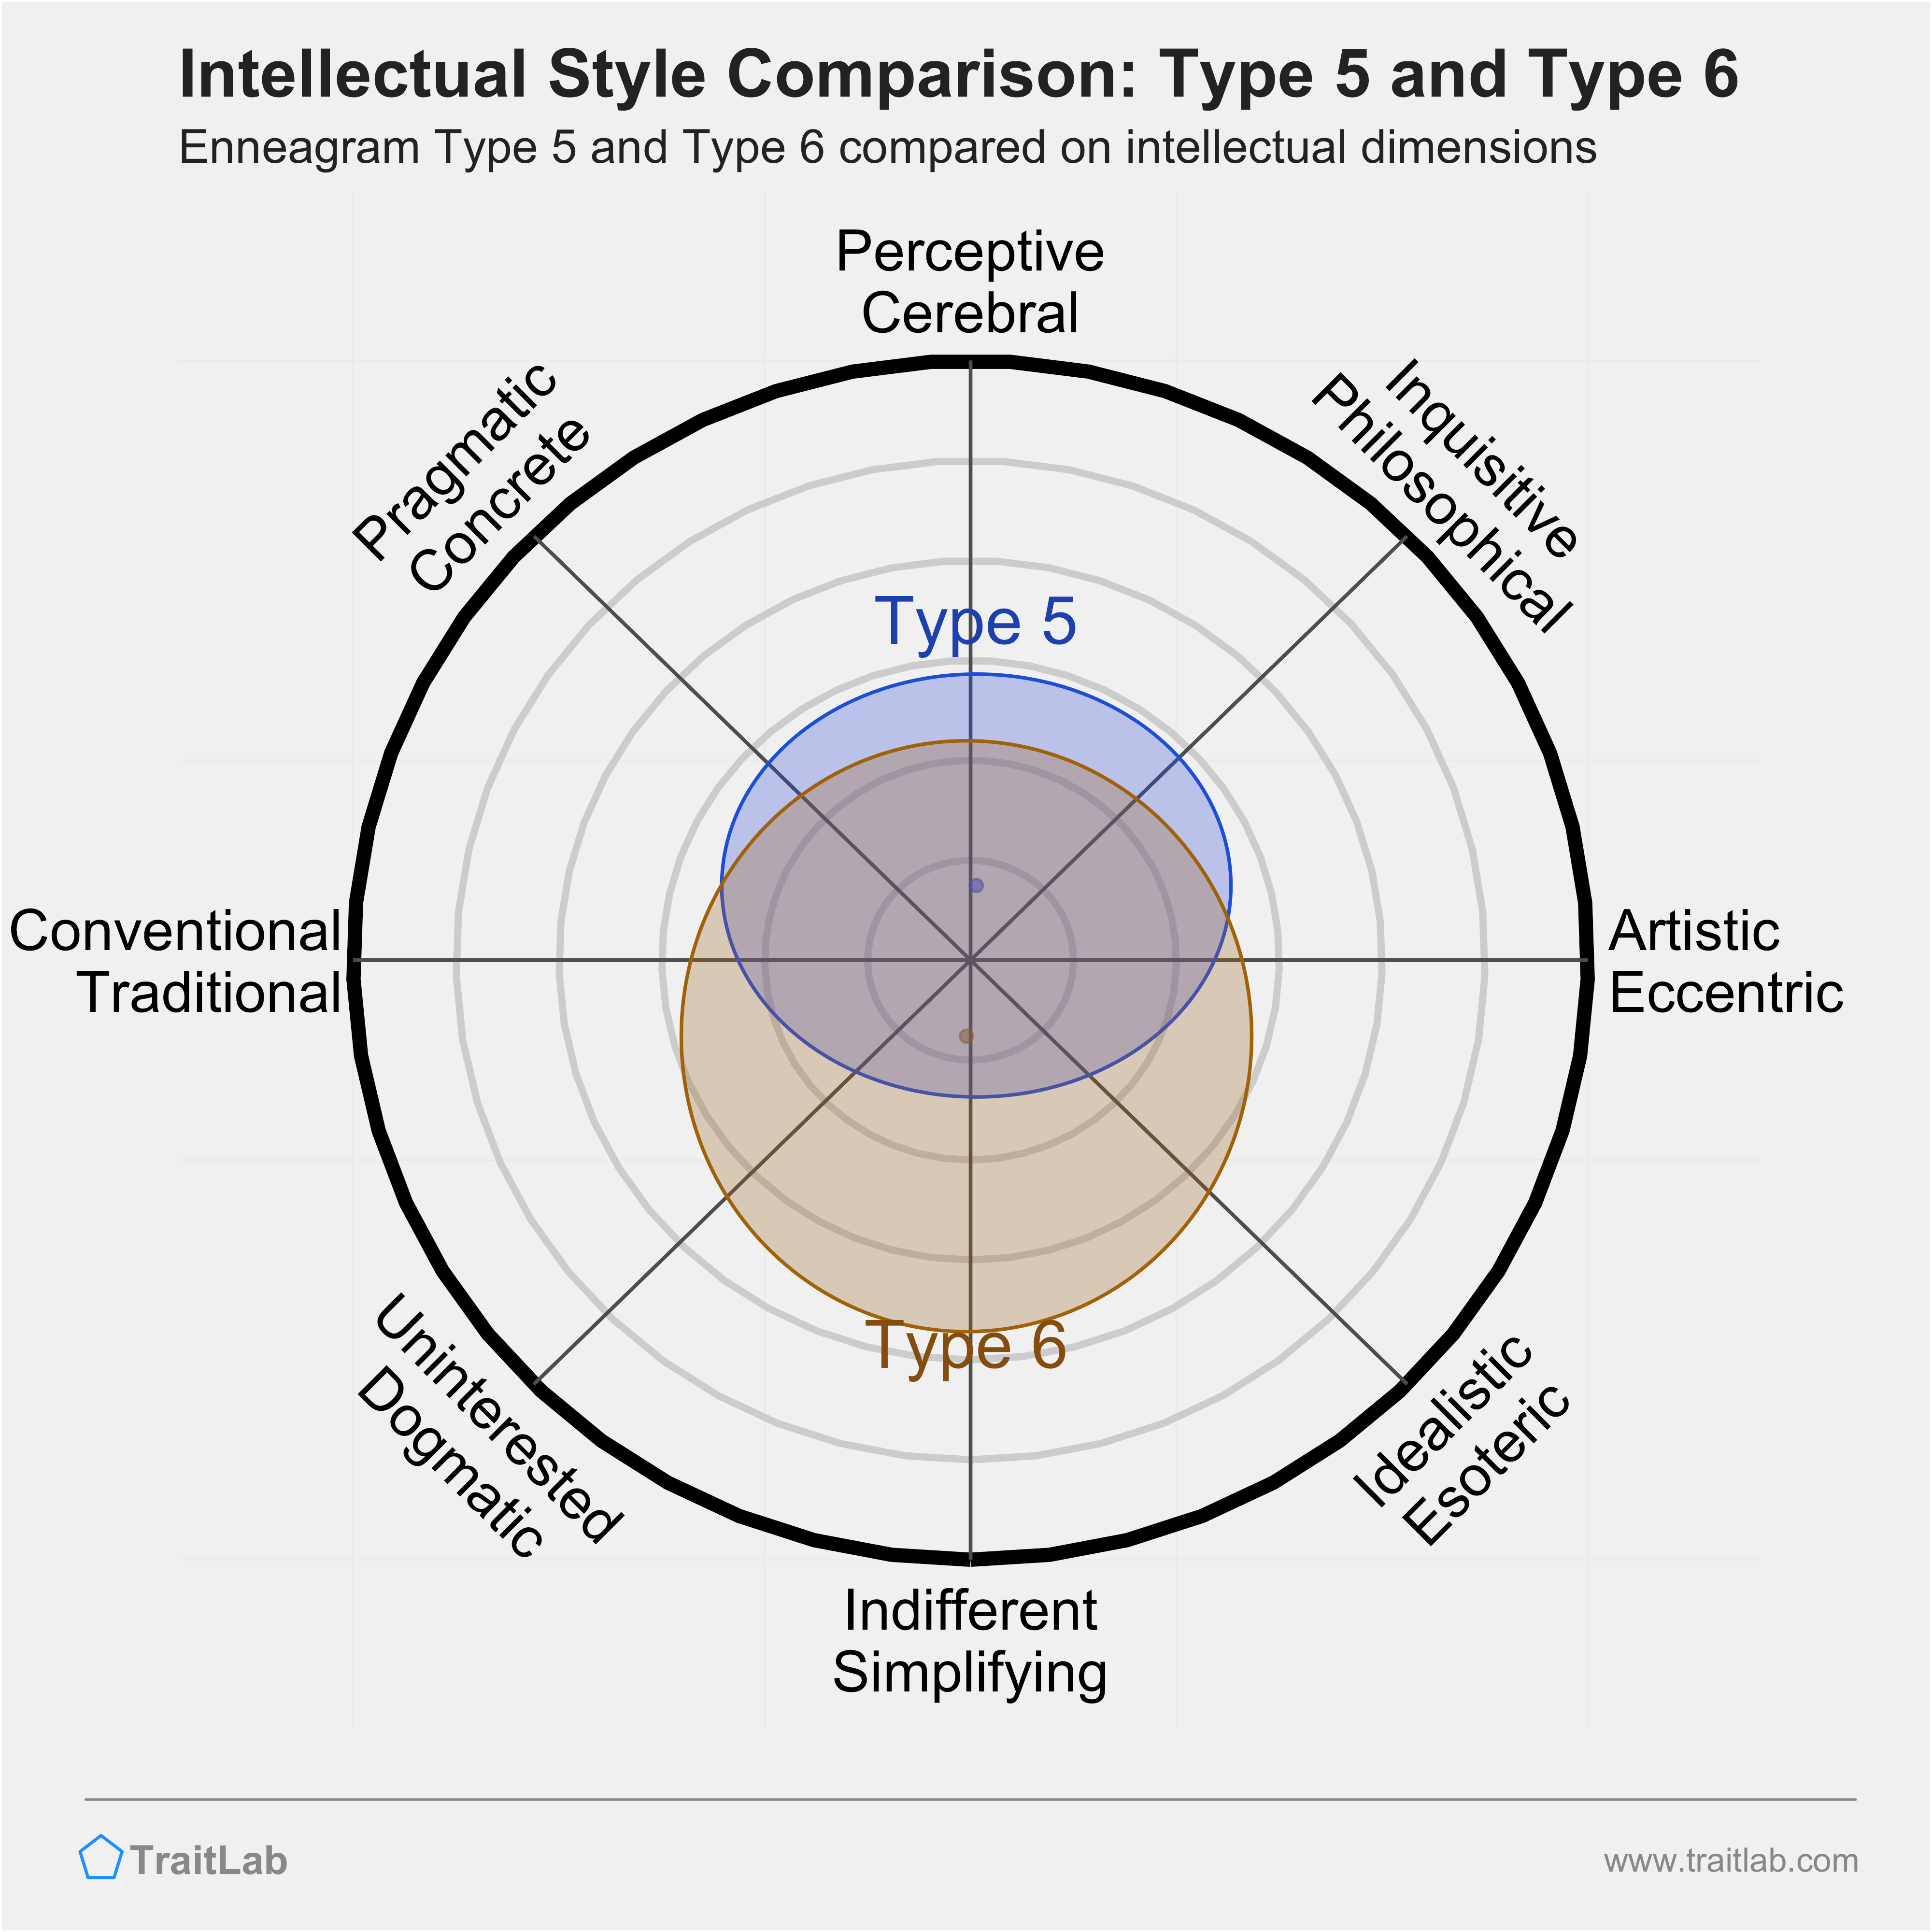 Type 5 and Type 6 comparison across intellectual dimensions